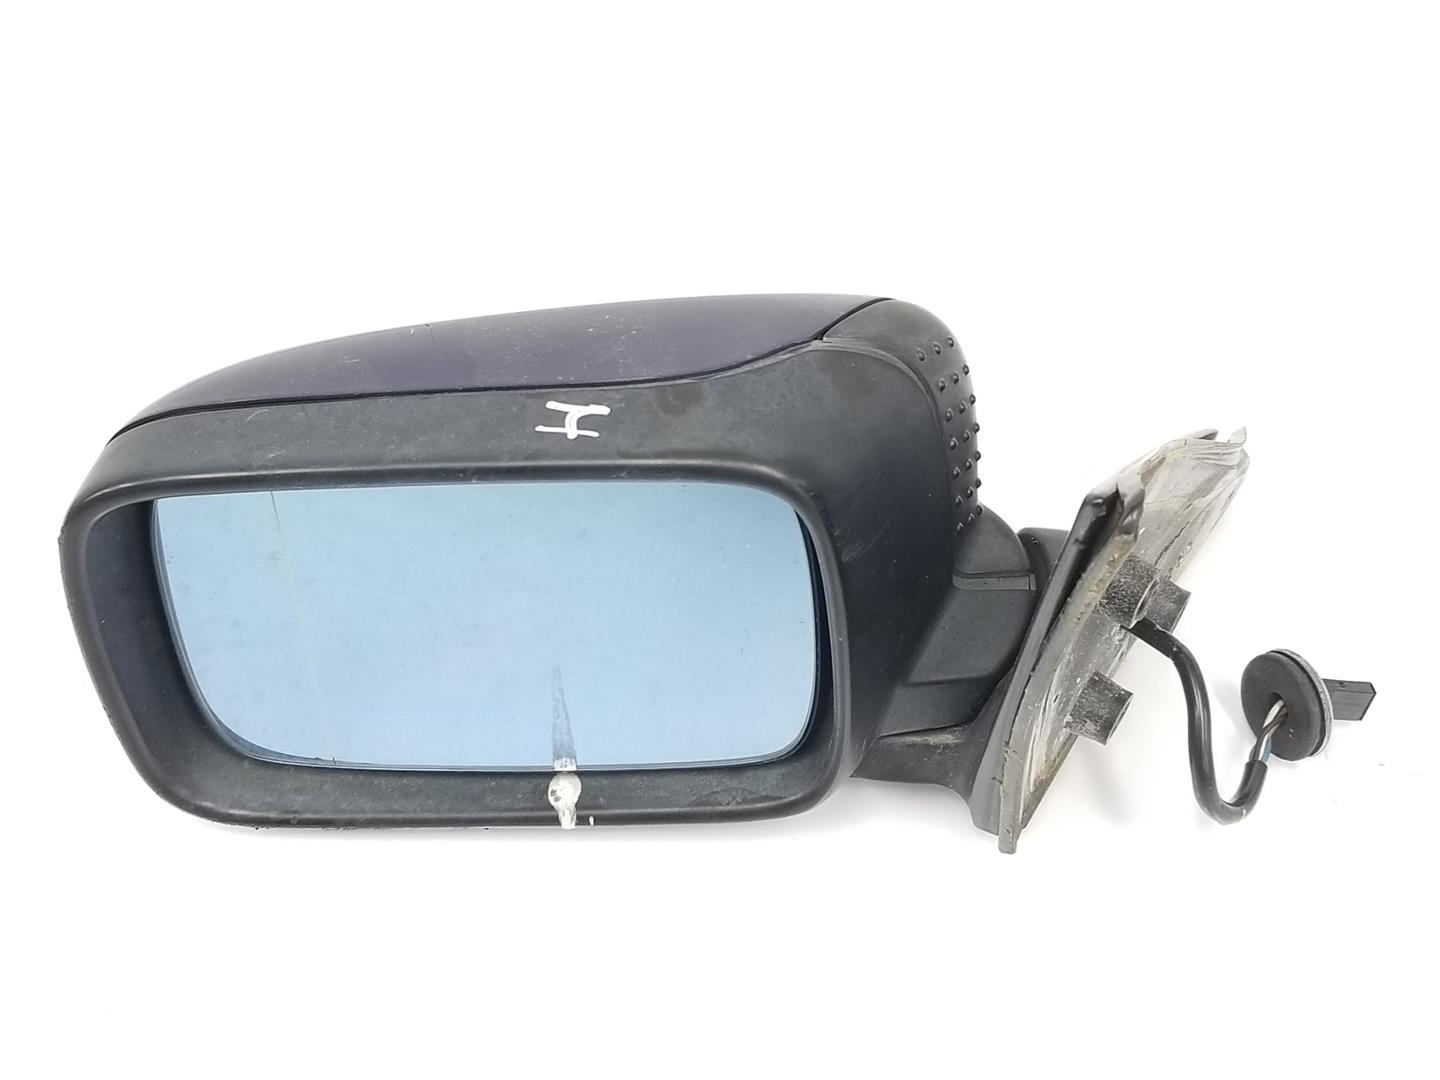 BMW 3 Series E36 (1990-2000) Left Side Wing Mirror 51168144407, 8144407 19928852